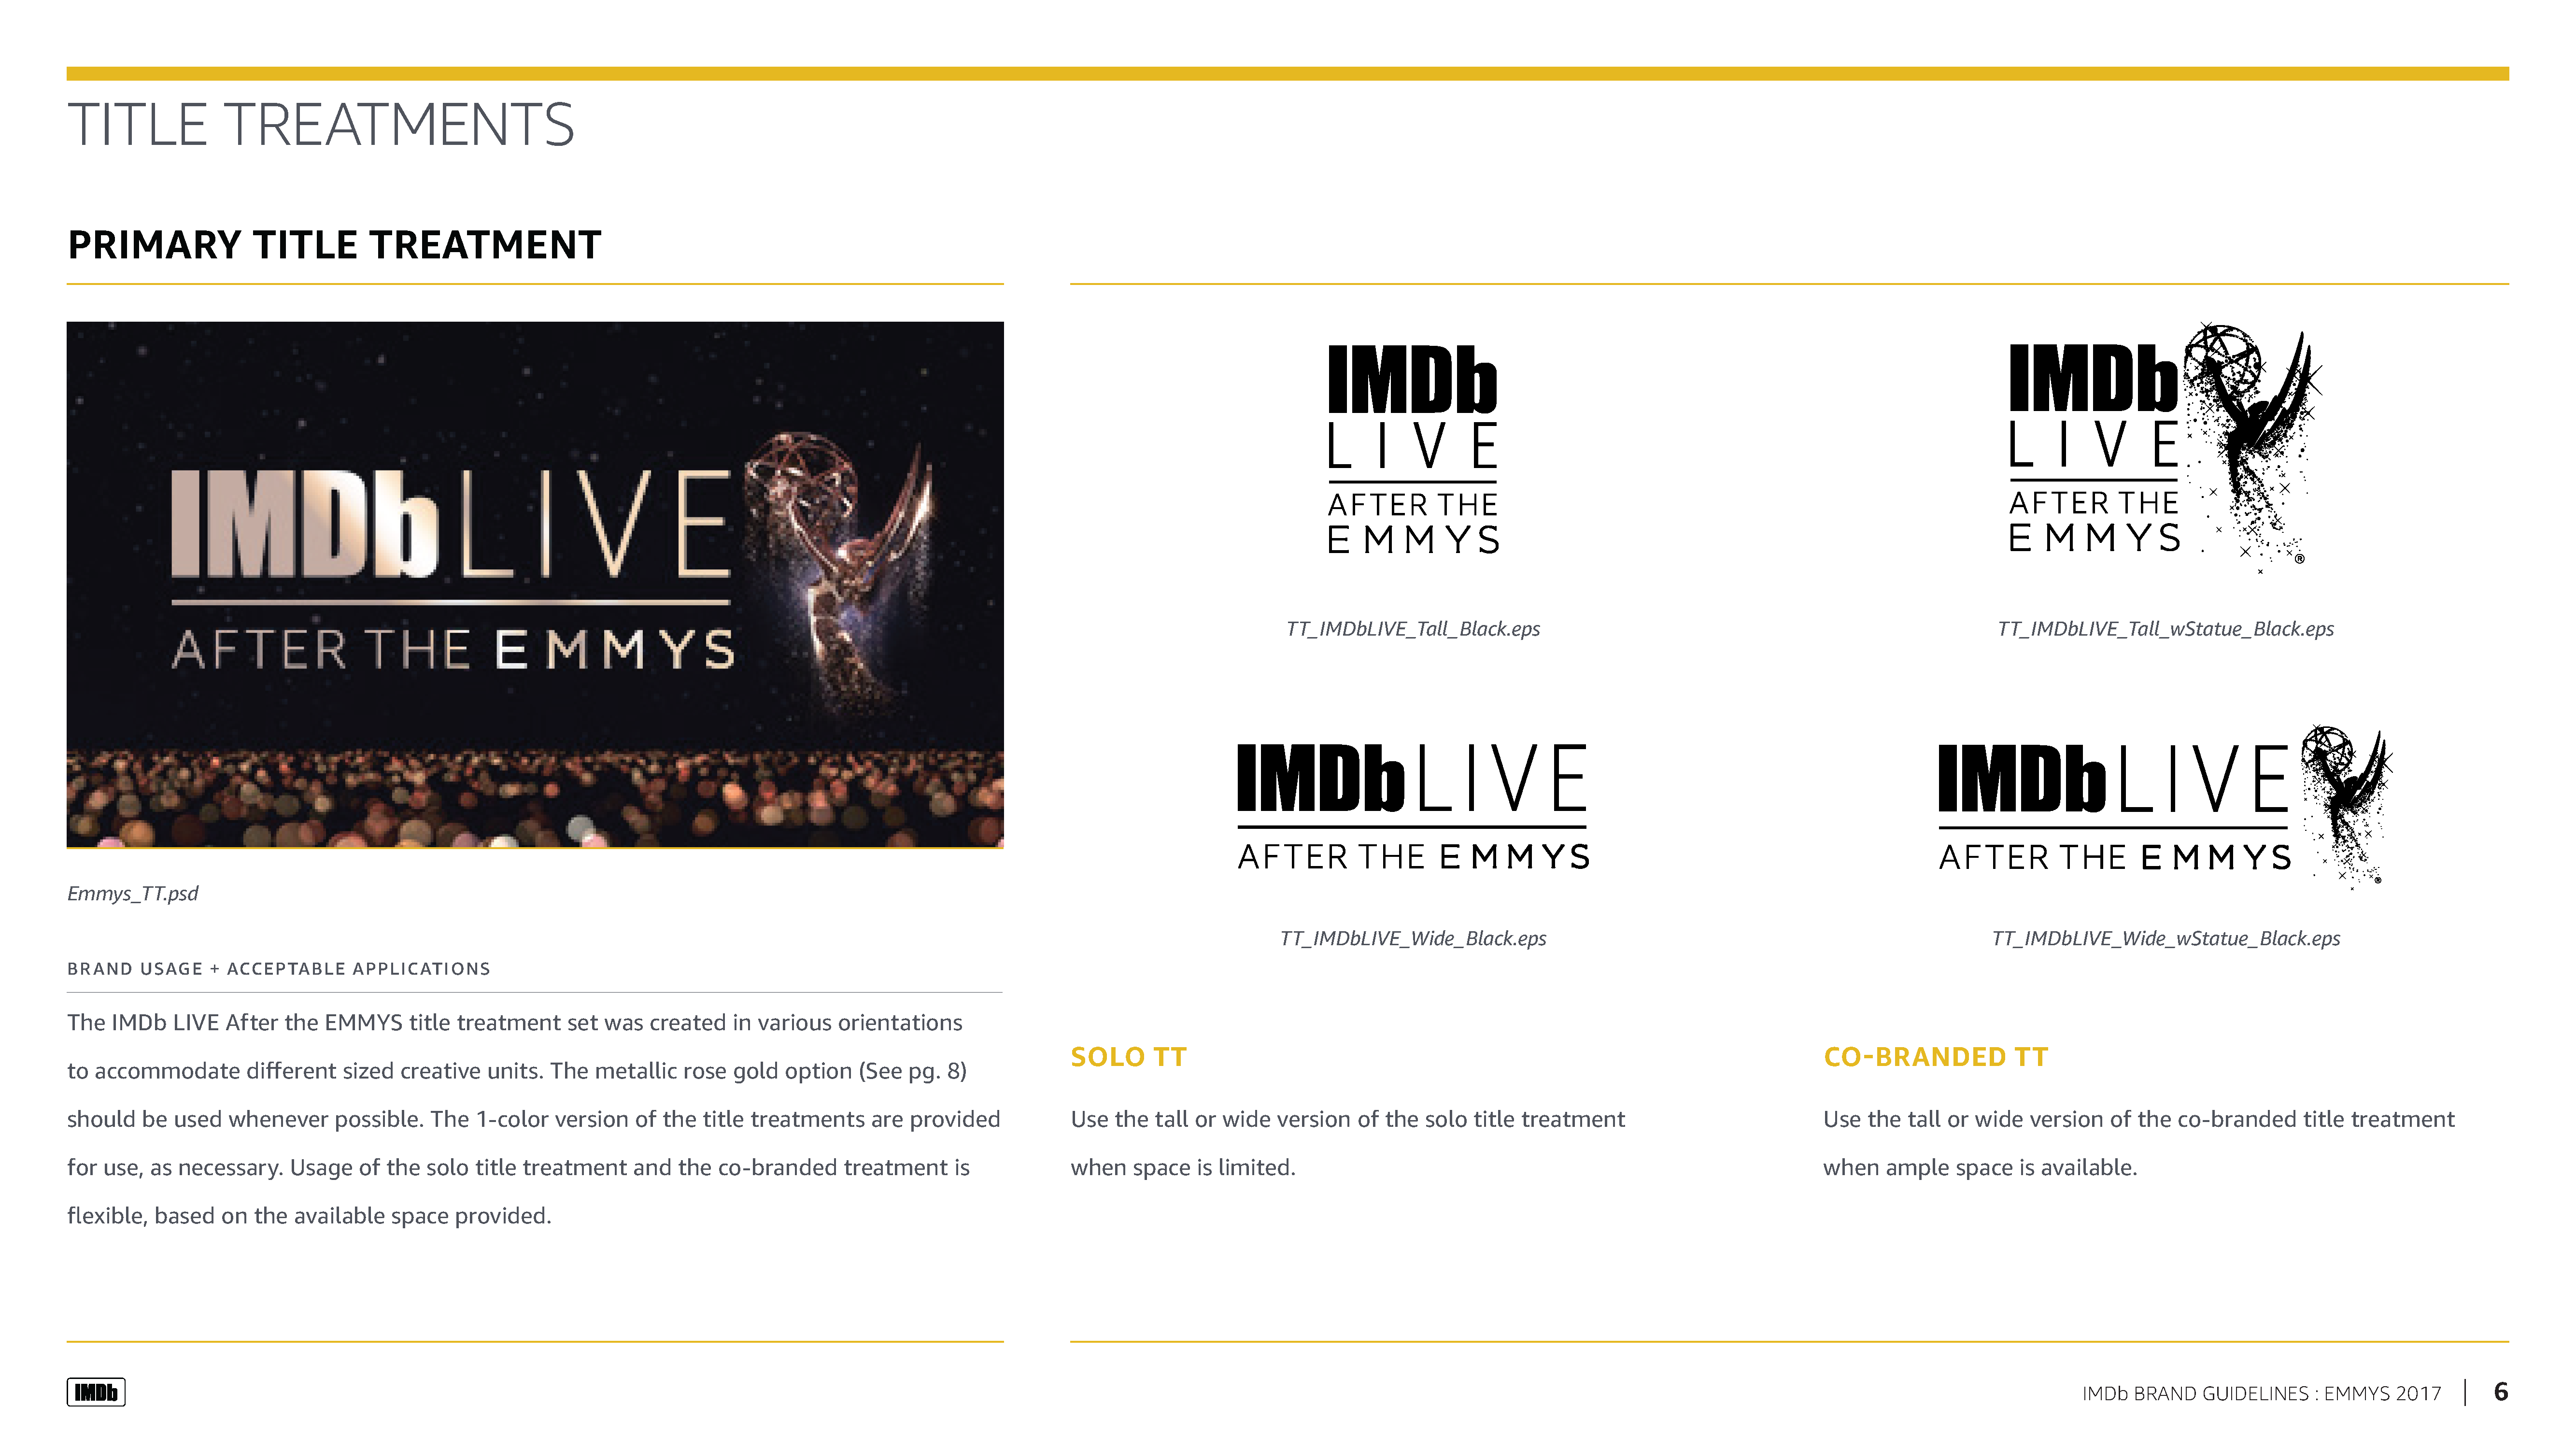 Emmys 2017 Brand Guidelines